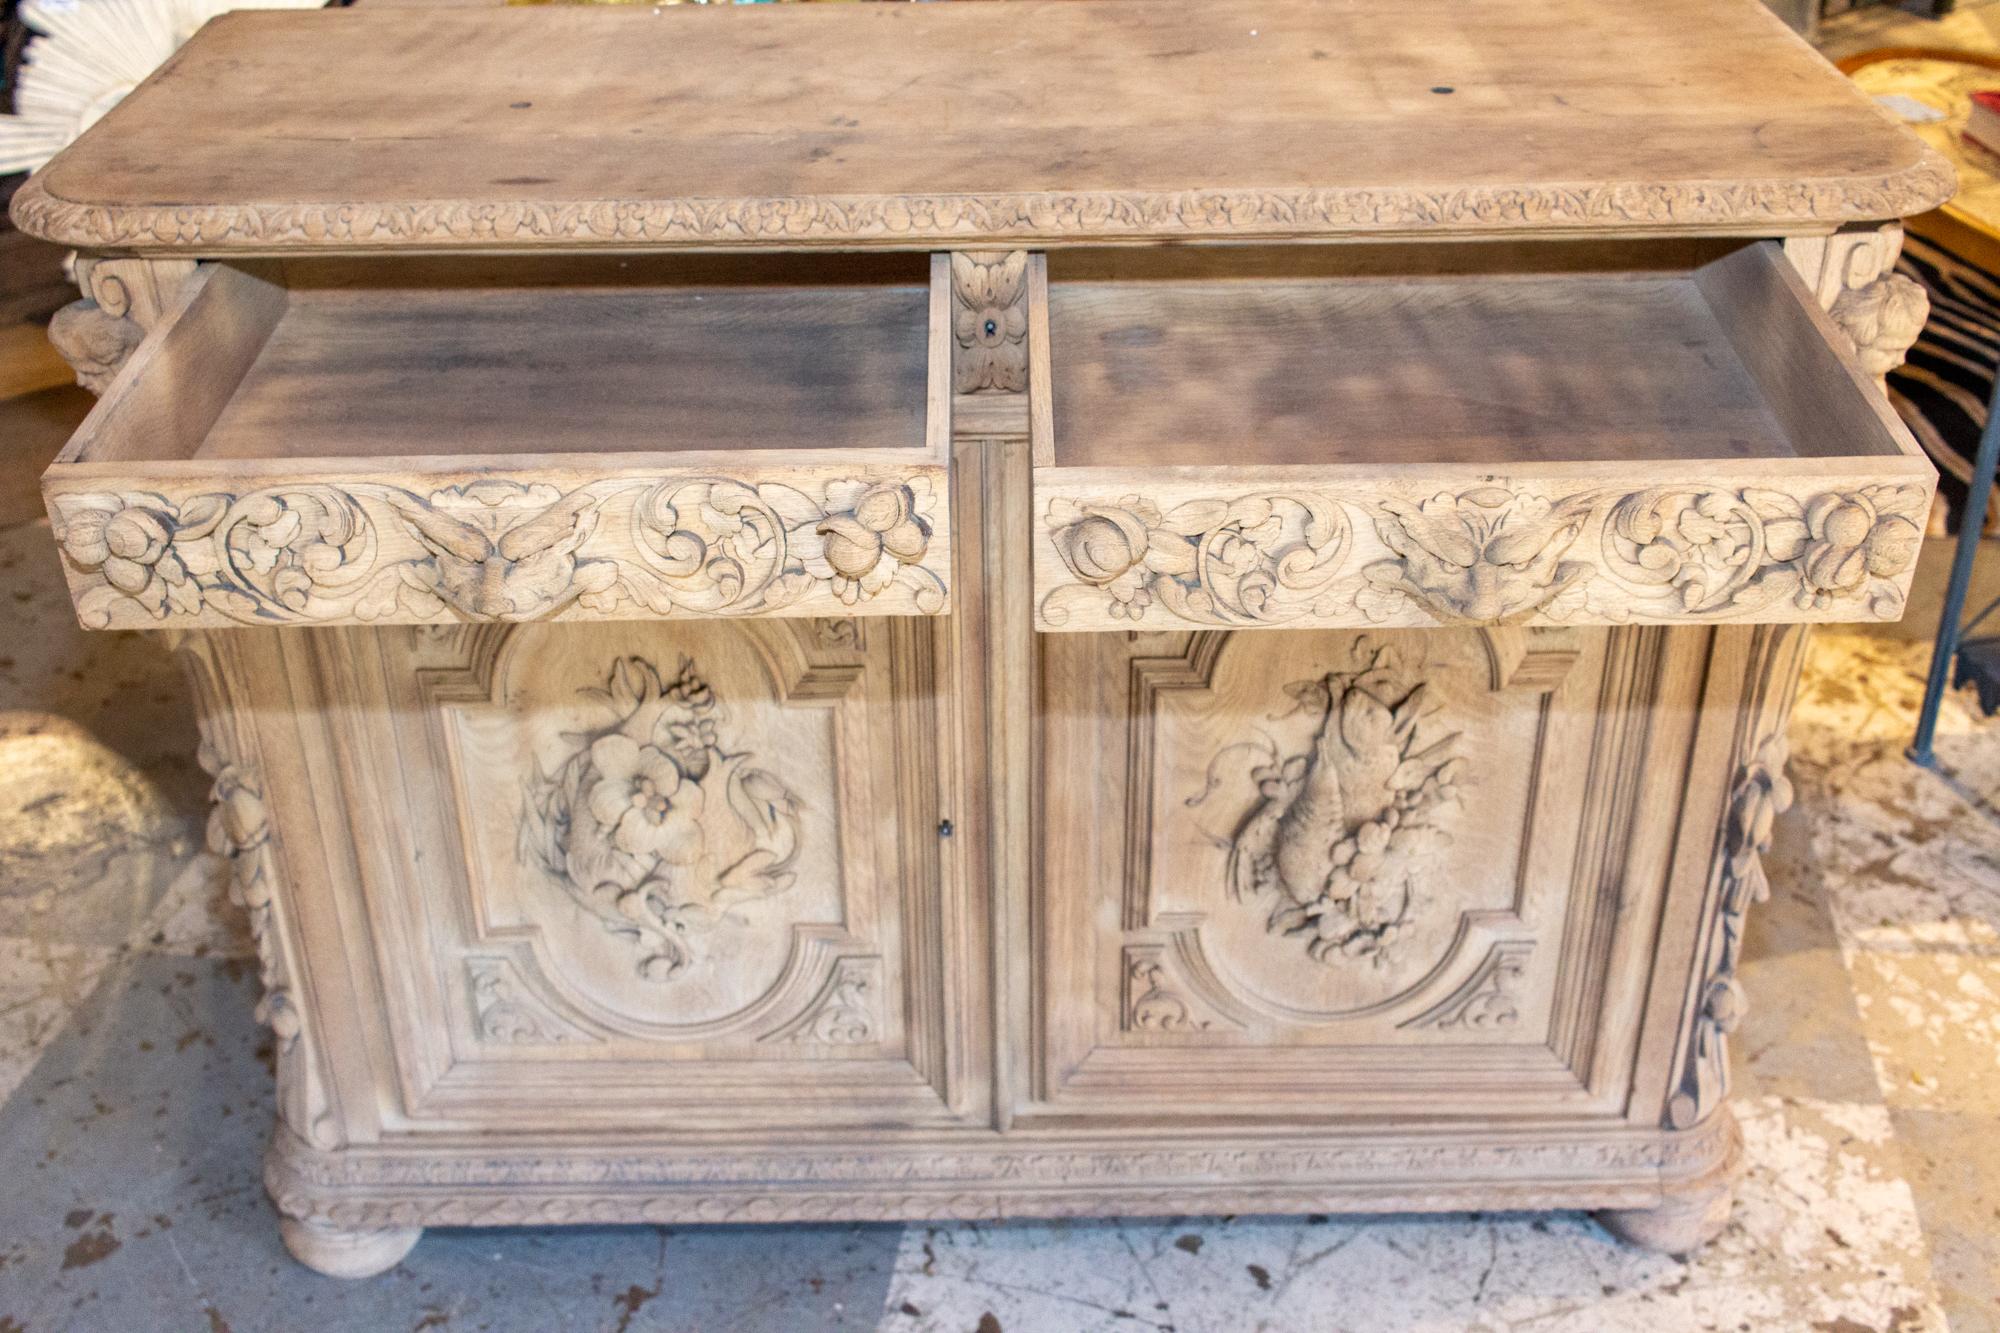 This antique French carved oak hunt buffet features carvings on three sides, decorated with images of animals, grotesques and intricate patterns. Two drawers along with ample interior storage allow for plenty of space to stow your items. There are